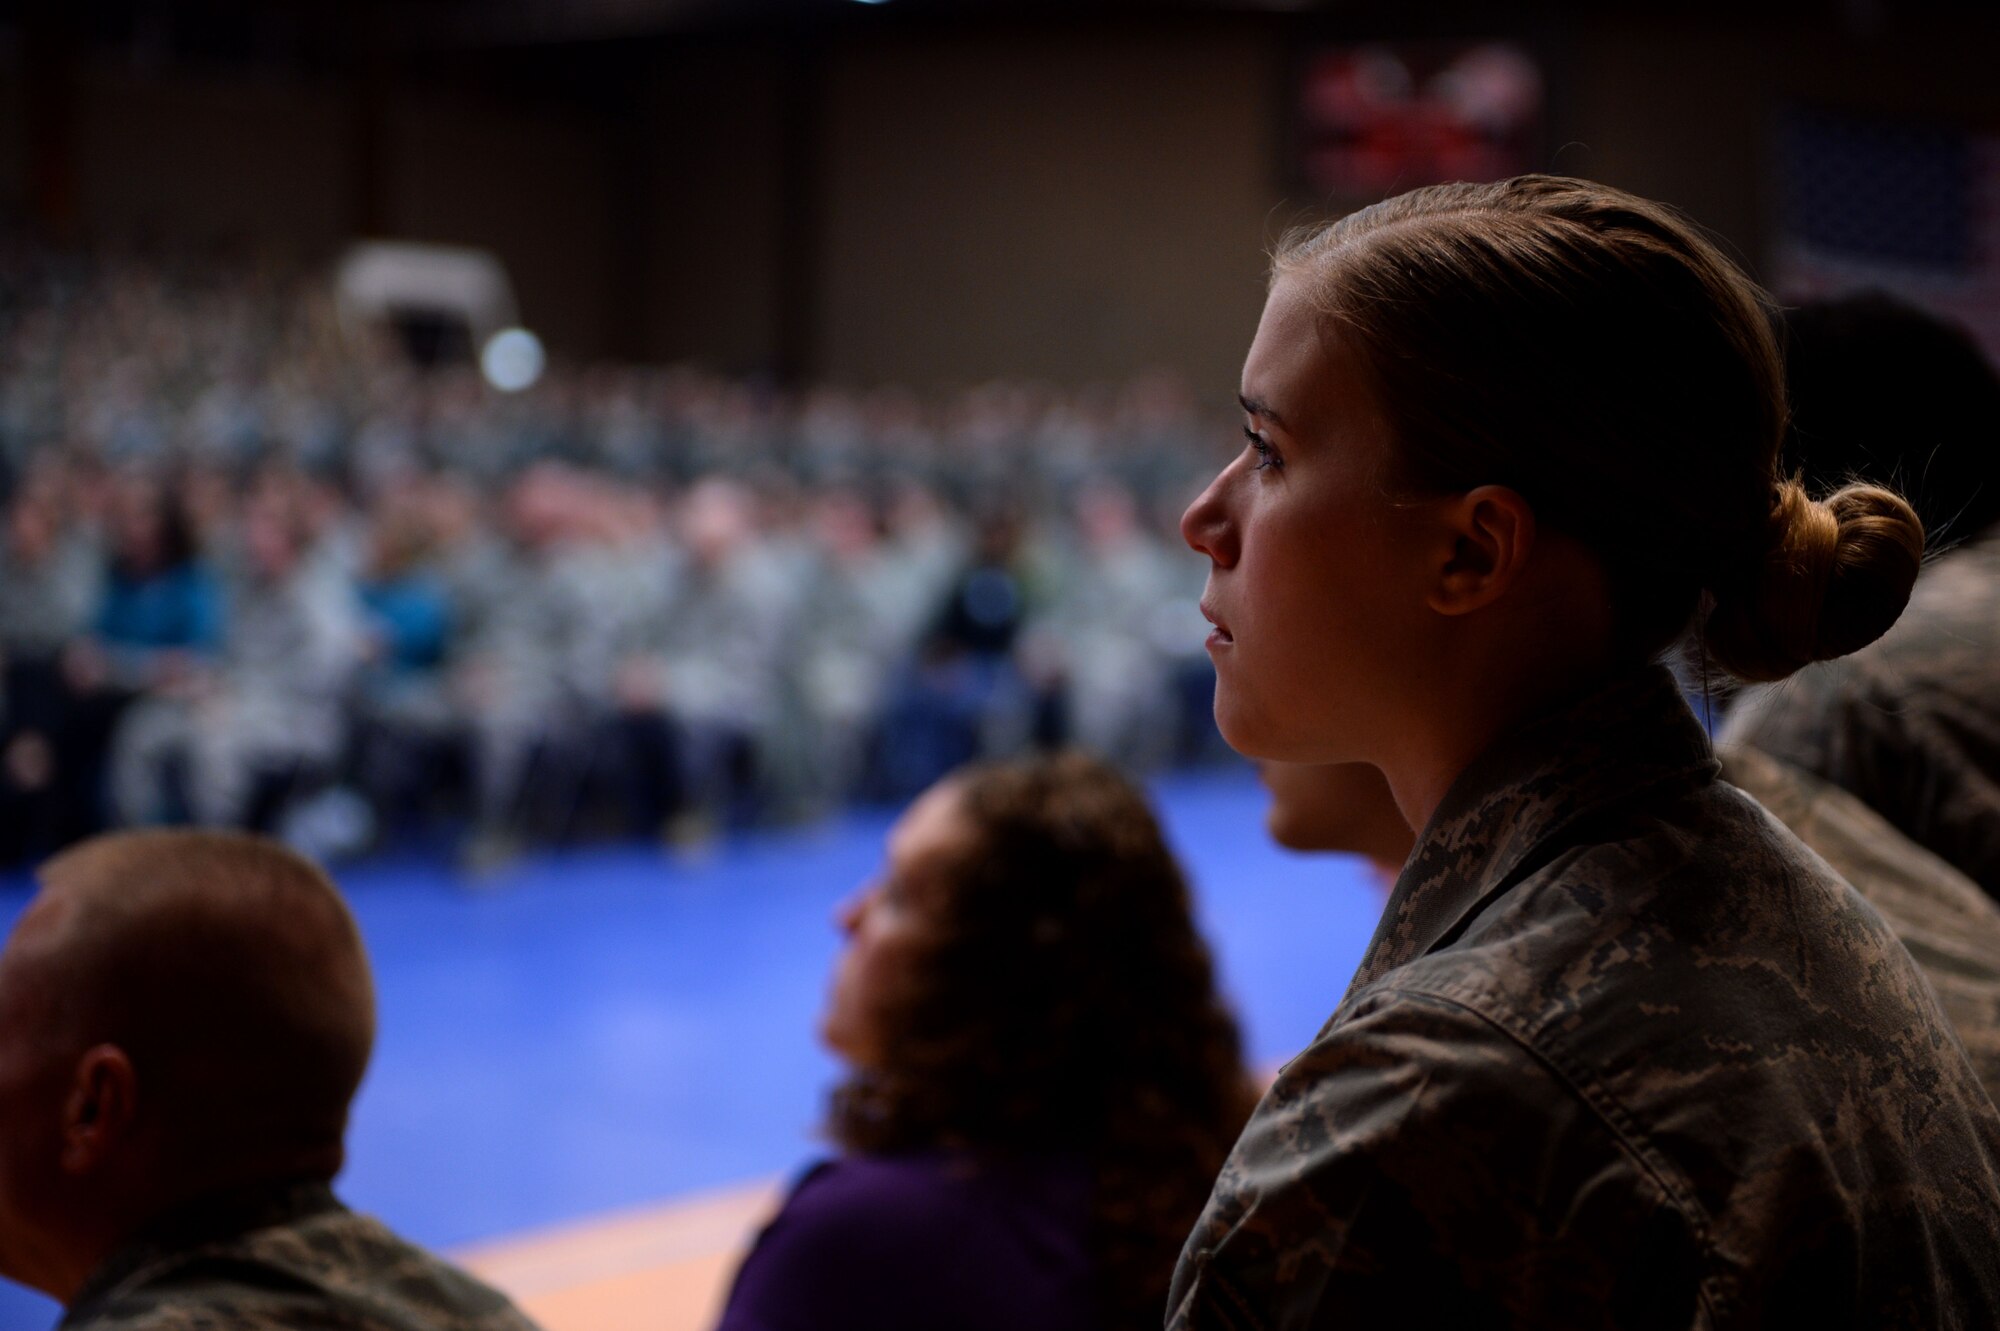 U.S. Air Force Airman 1st Class Alissa Rogers, a 52nd Force Support Squadron food shift leader from Medford, Minn., watches a video on sexual assault during an all call at the Skelton Memorial Fitness Center on Spangdahlem Air Base, Germany, April 18, 2014. The Sexual Assault Prevention and Response down day served as the first of two on ridding the Air Force of sexual assault. The wing will participate in a second down day this fall. (U.S. Air Force photo by Senior Airman Alexis Siekert/Released)